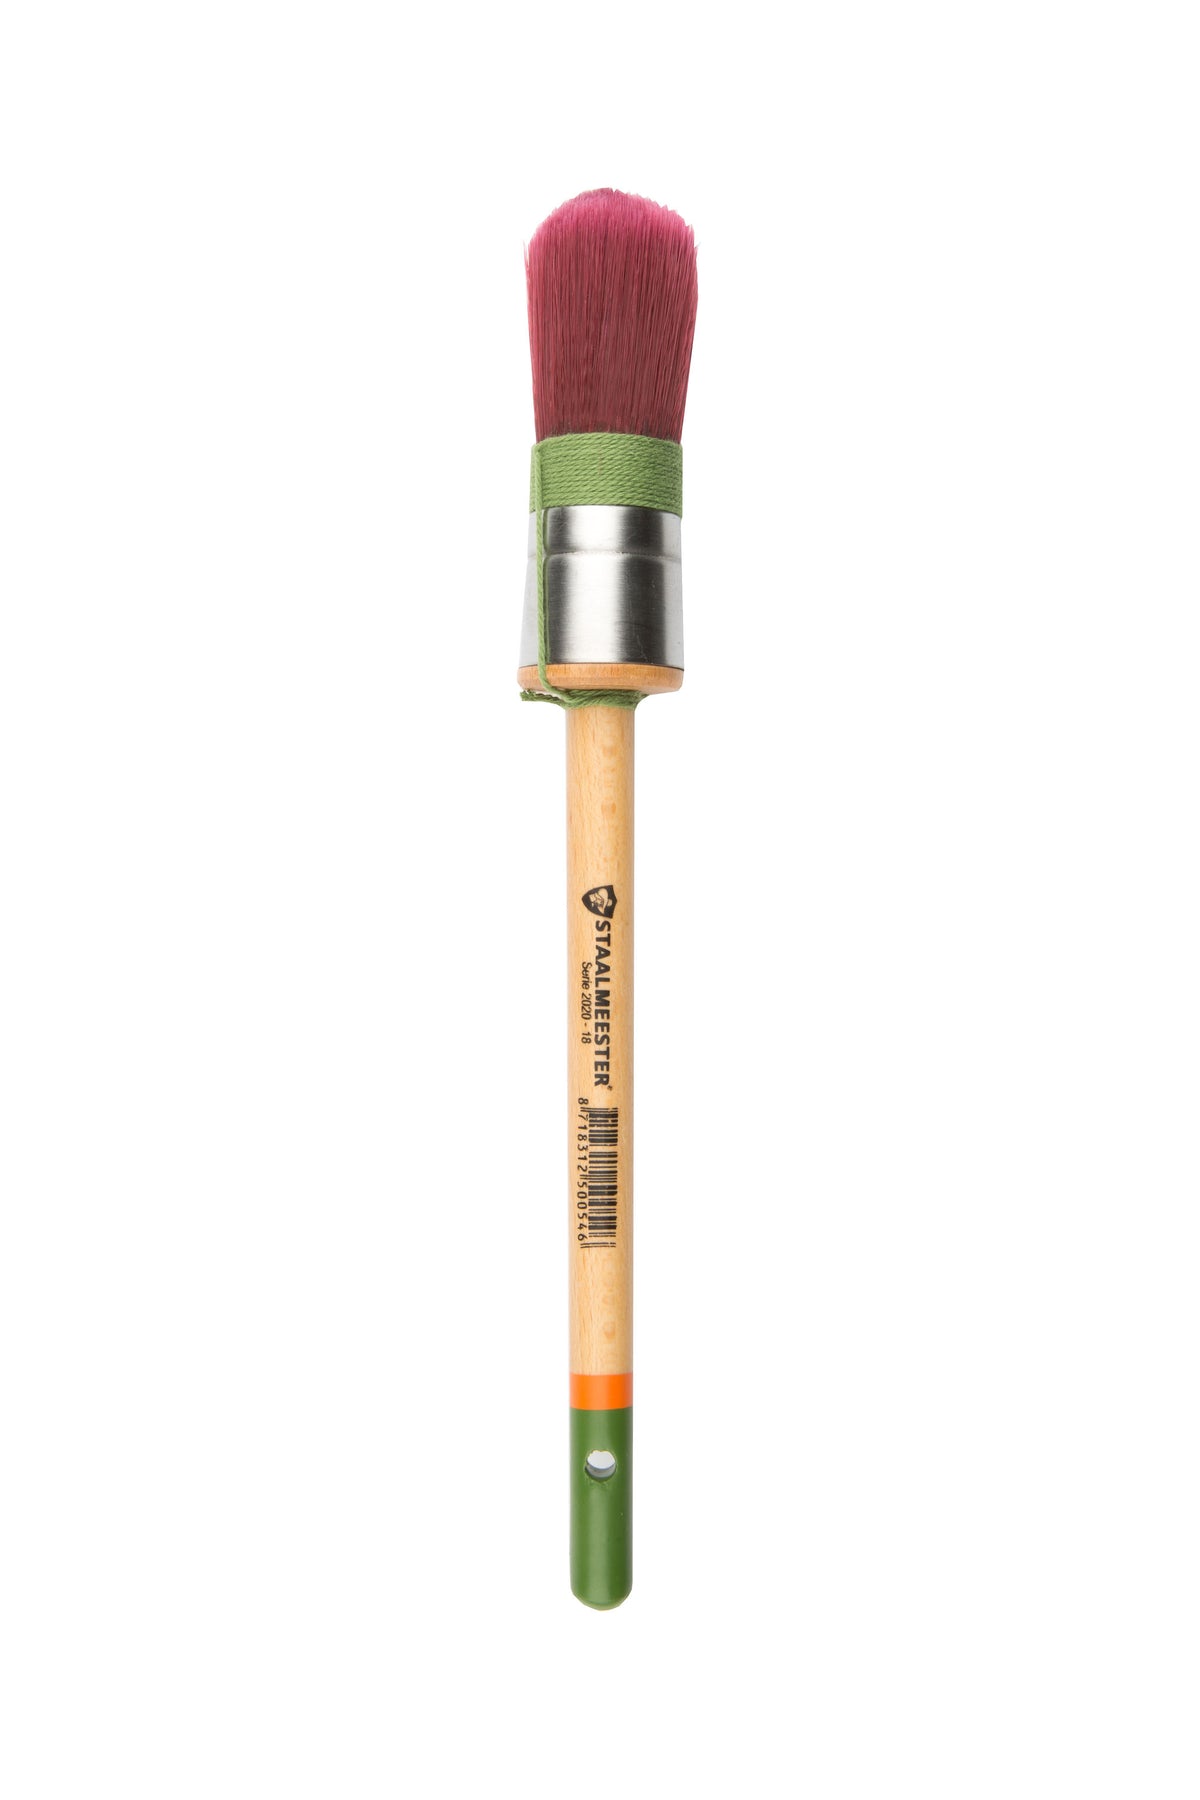 Staalmeester ProHybrid Series 100% Synthetic Brushes